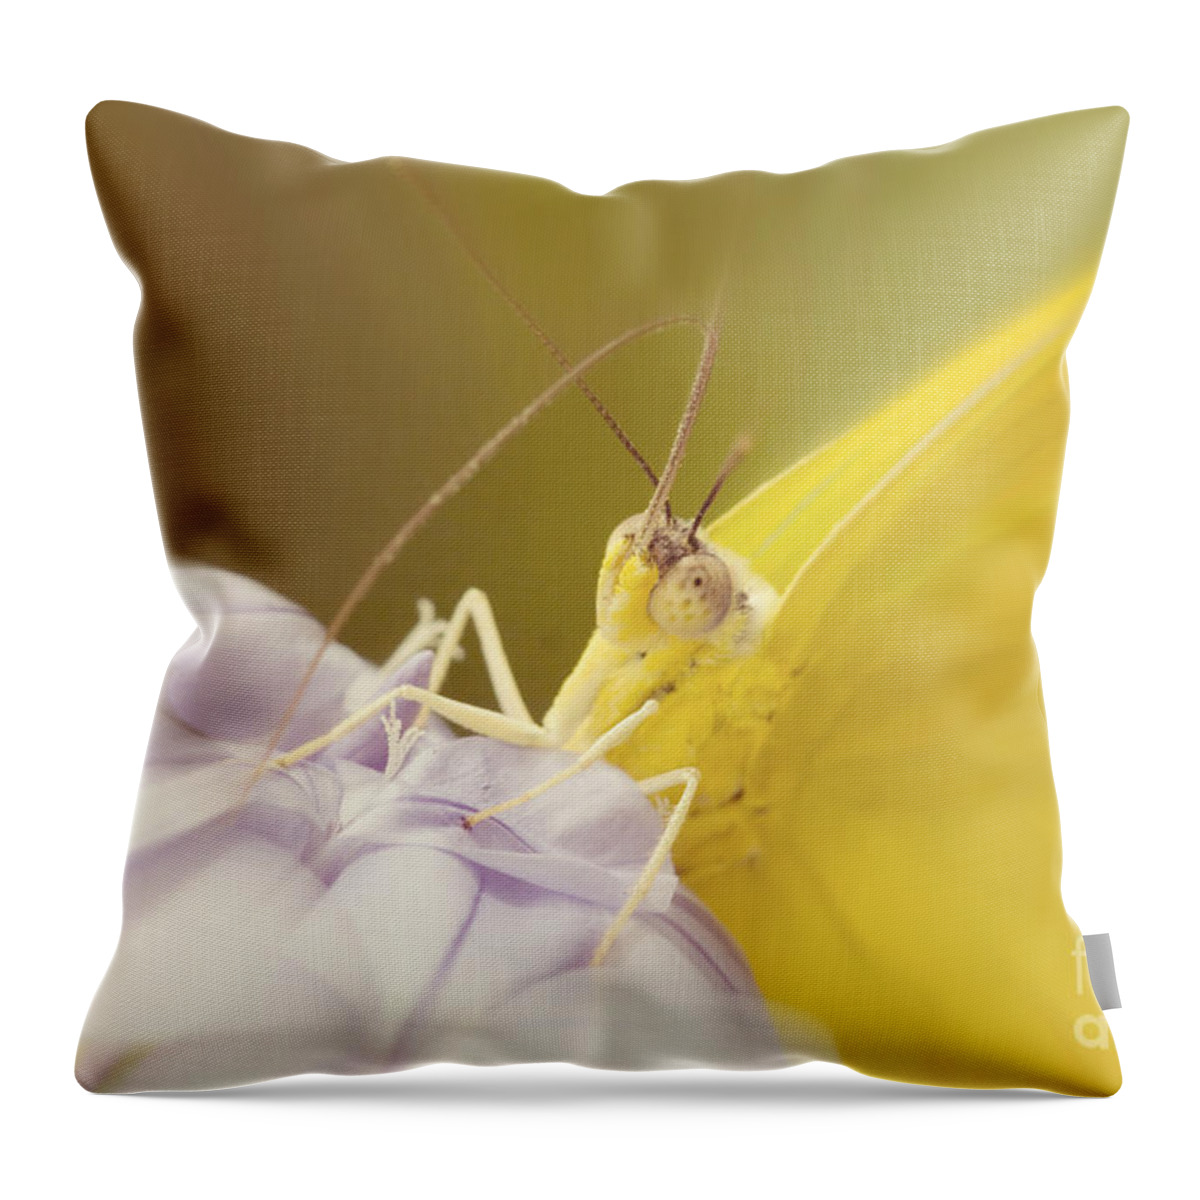 Eye Contact Throw Pillow featuring the photograph Butterfly Eye Contact by Chris Scroggins